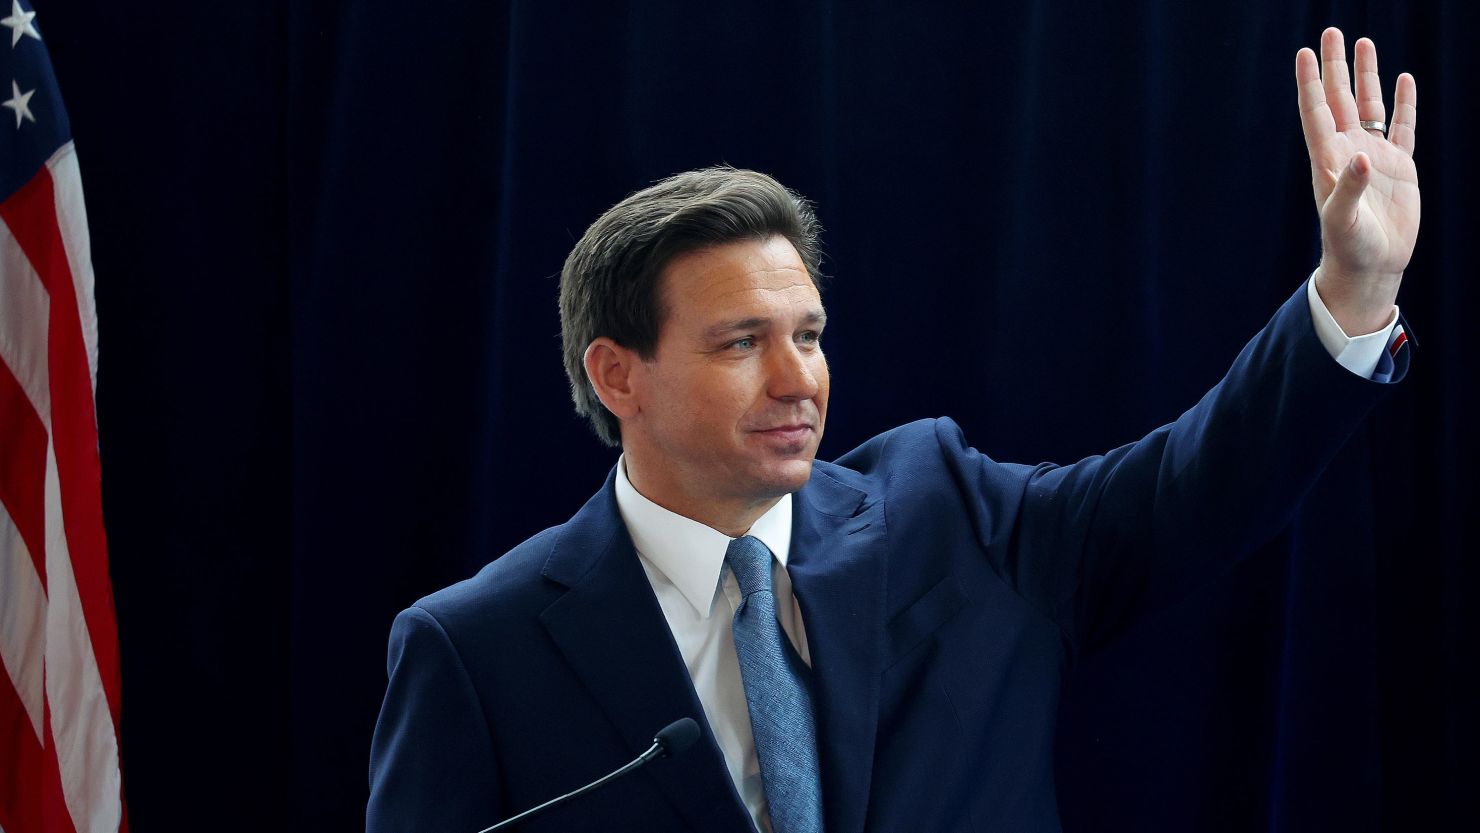 DeSantis moves his presidential ambitions into the open with Iowa visit